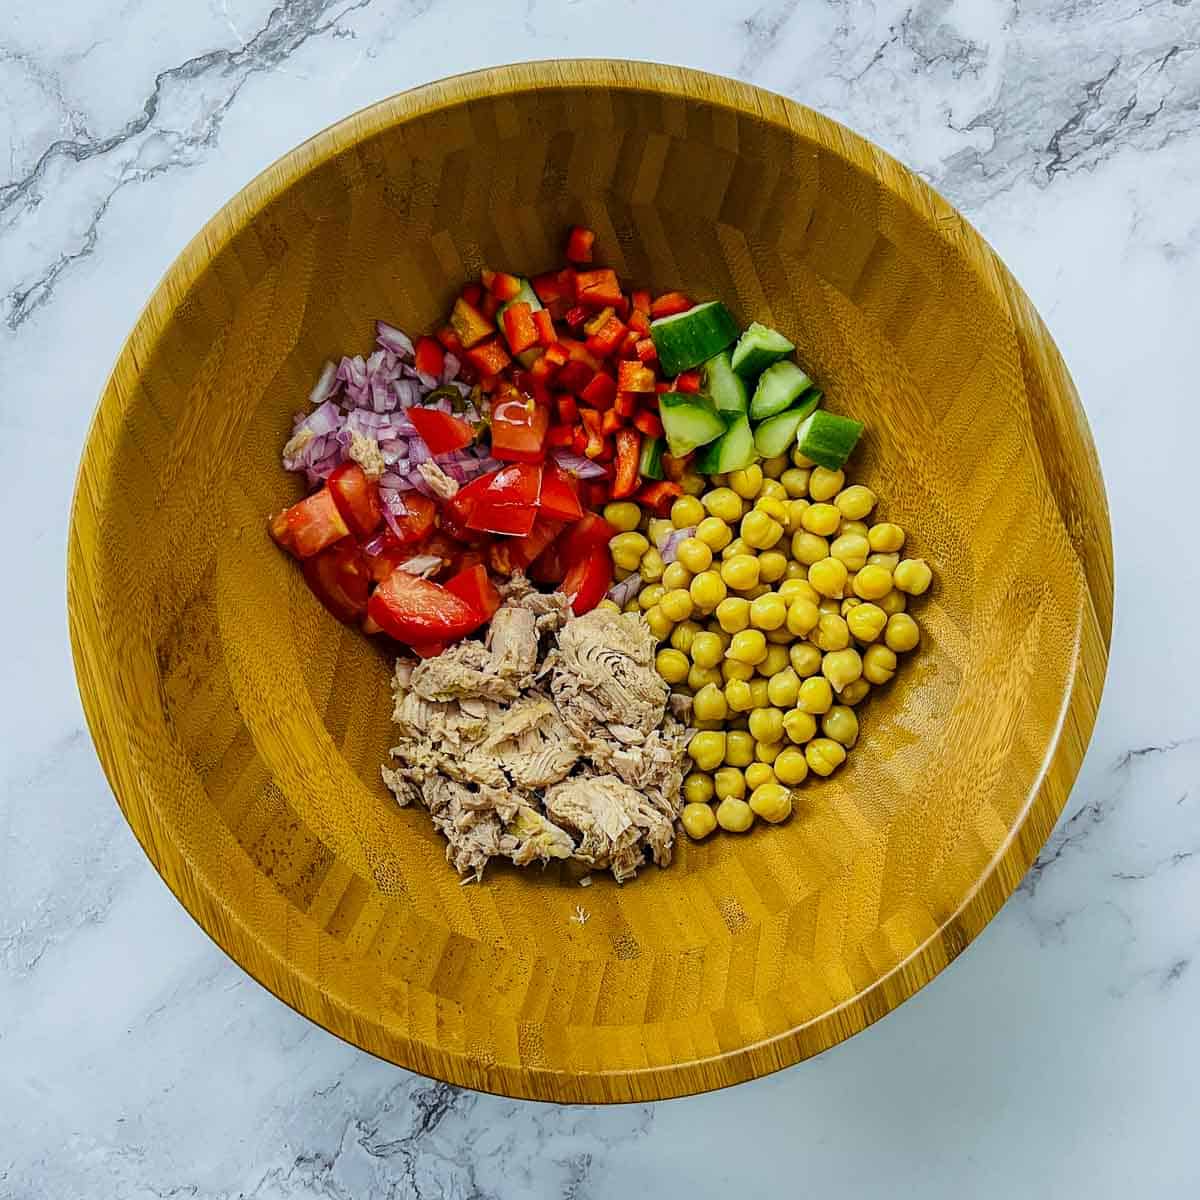 Tuna, chickpea, and salad veggies in a mixing bowl.